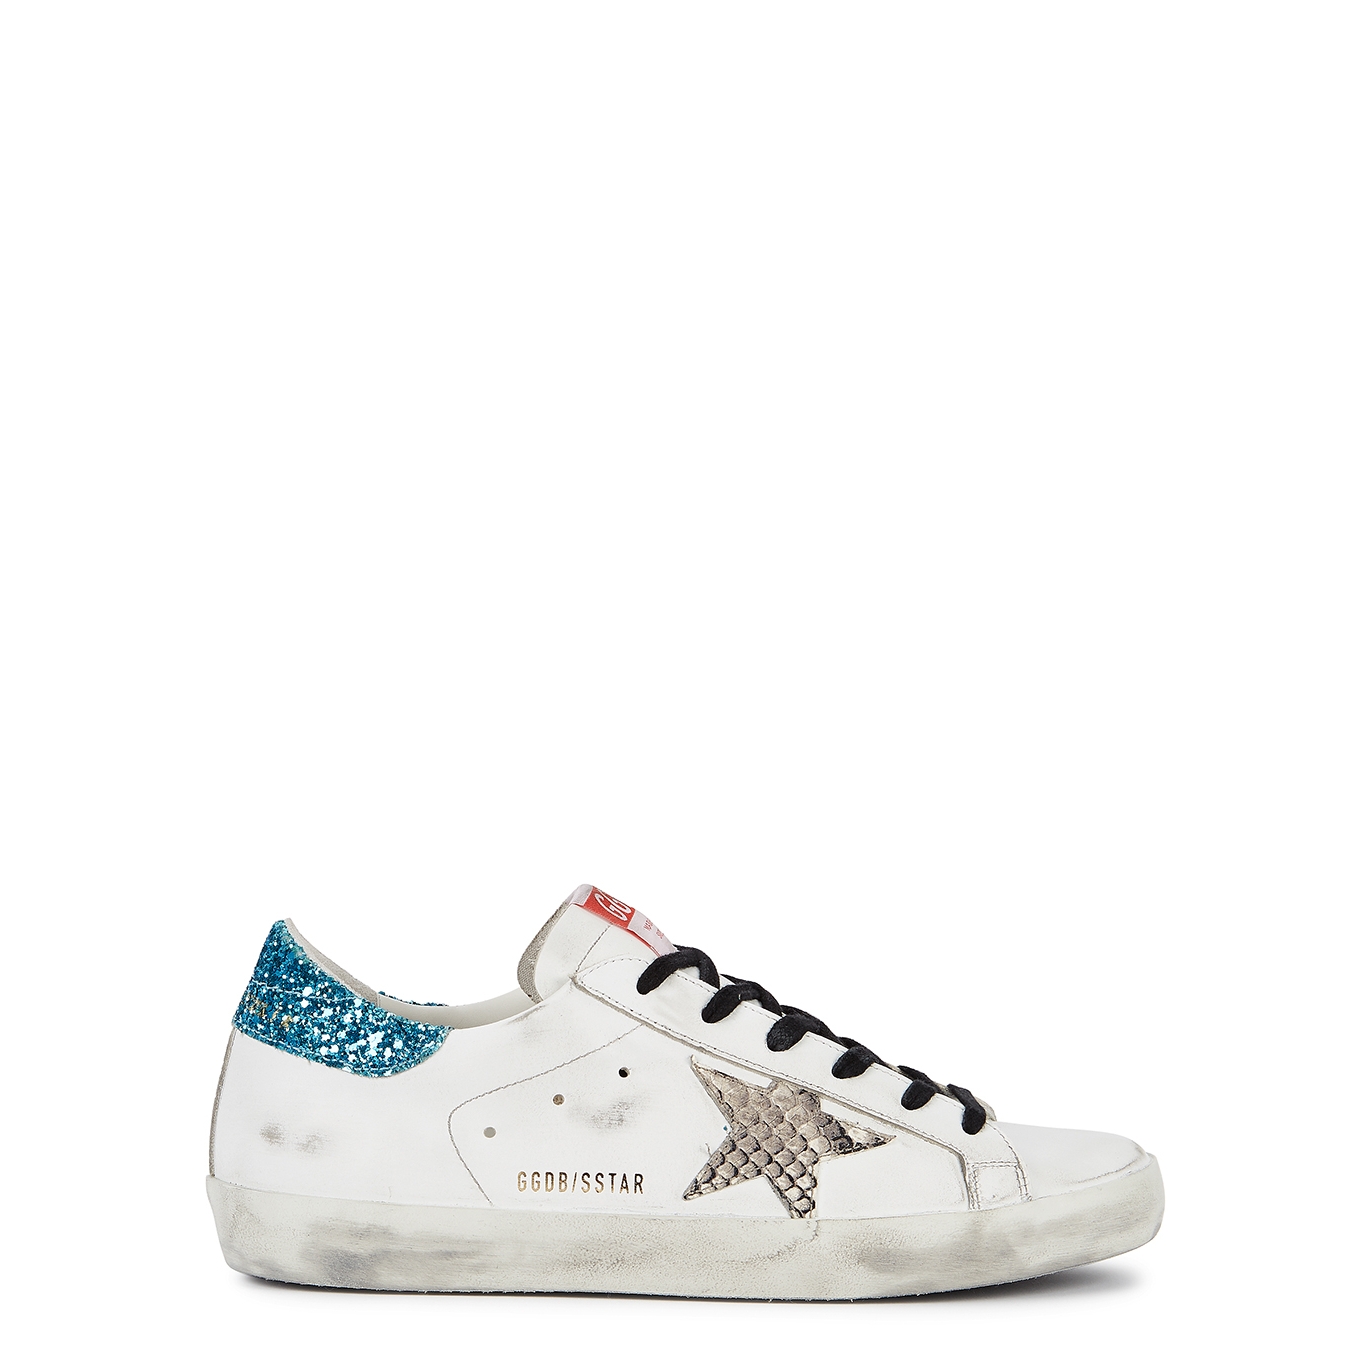 Golden Goose Superstar Distressed Leather Sneakers - White And Blue - 3